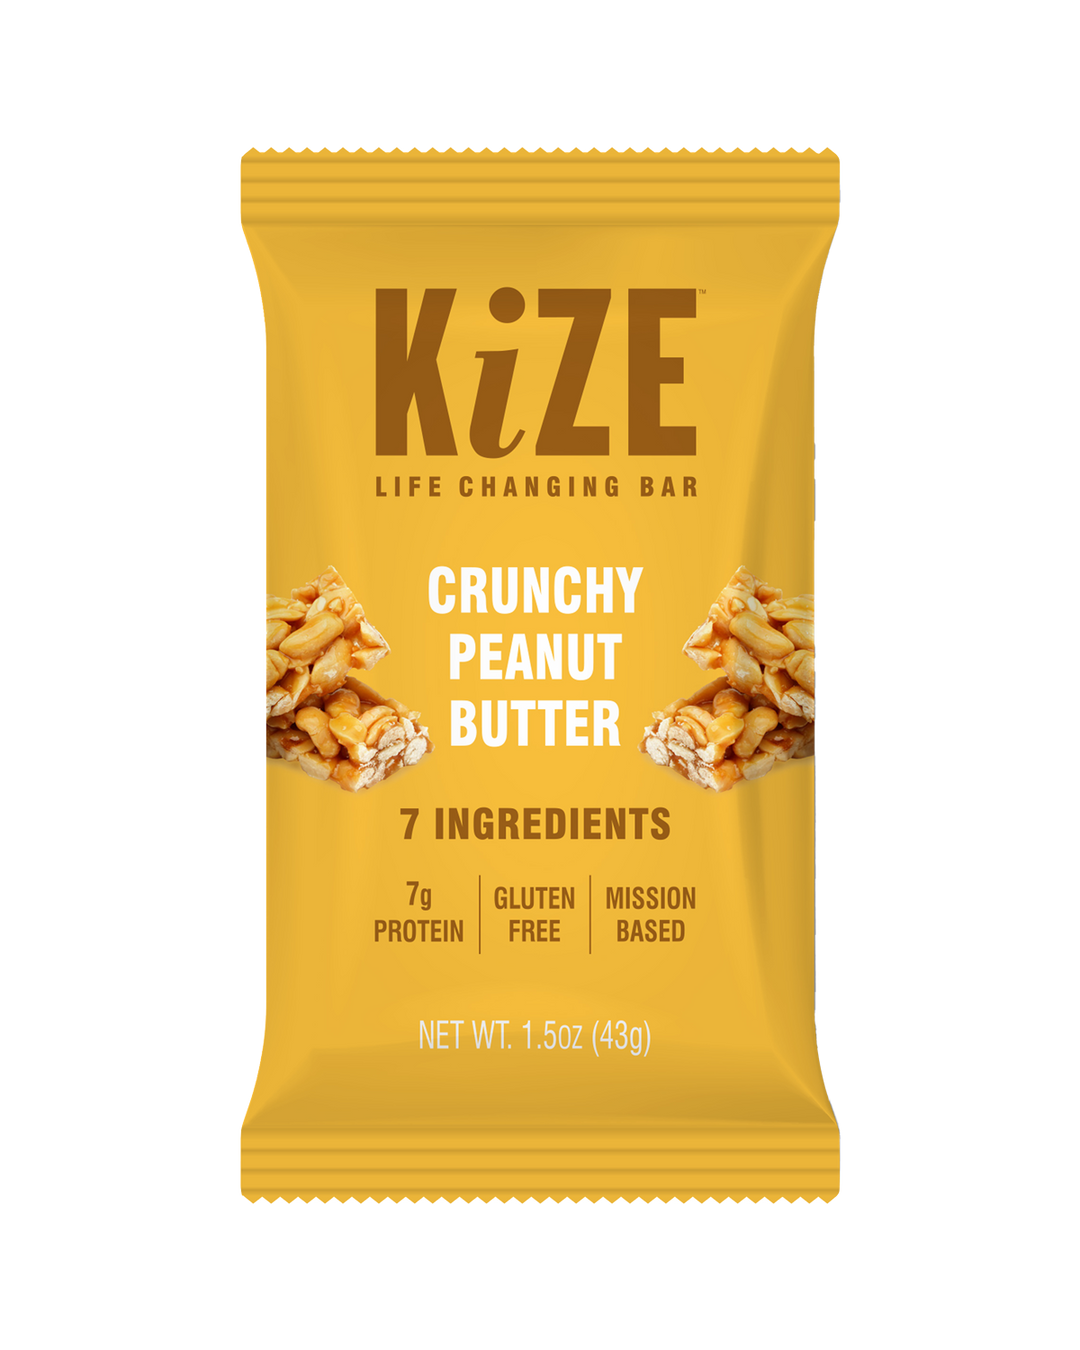 Crunchy Peanut Butter Kize Protein Bar in Package